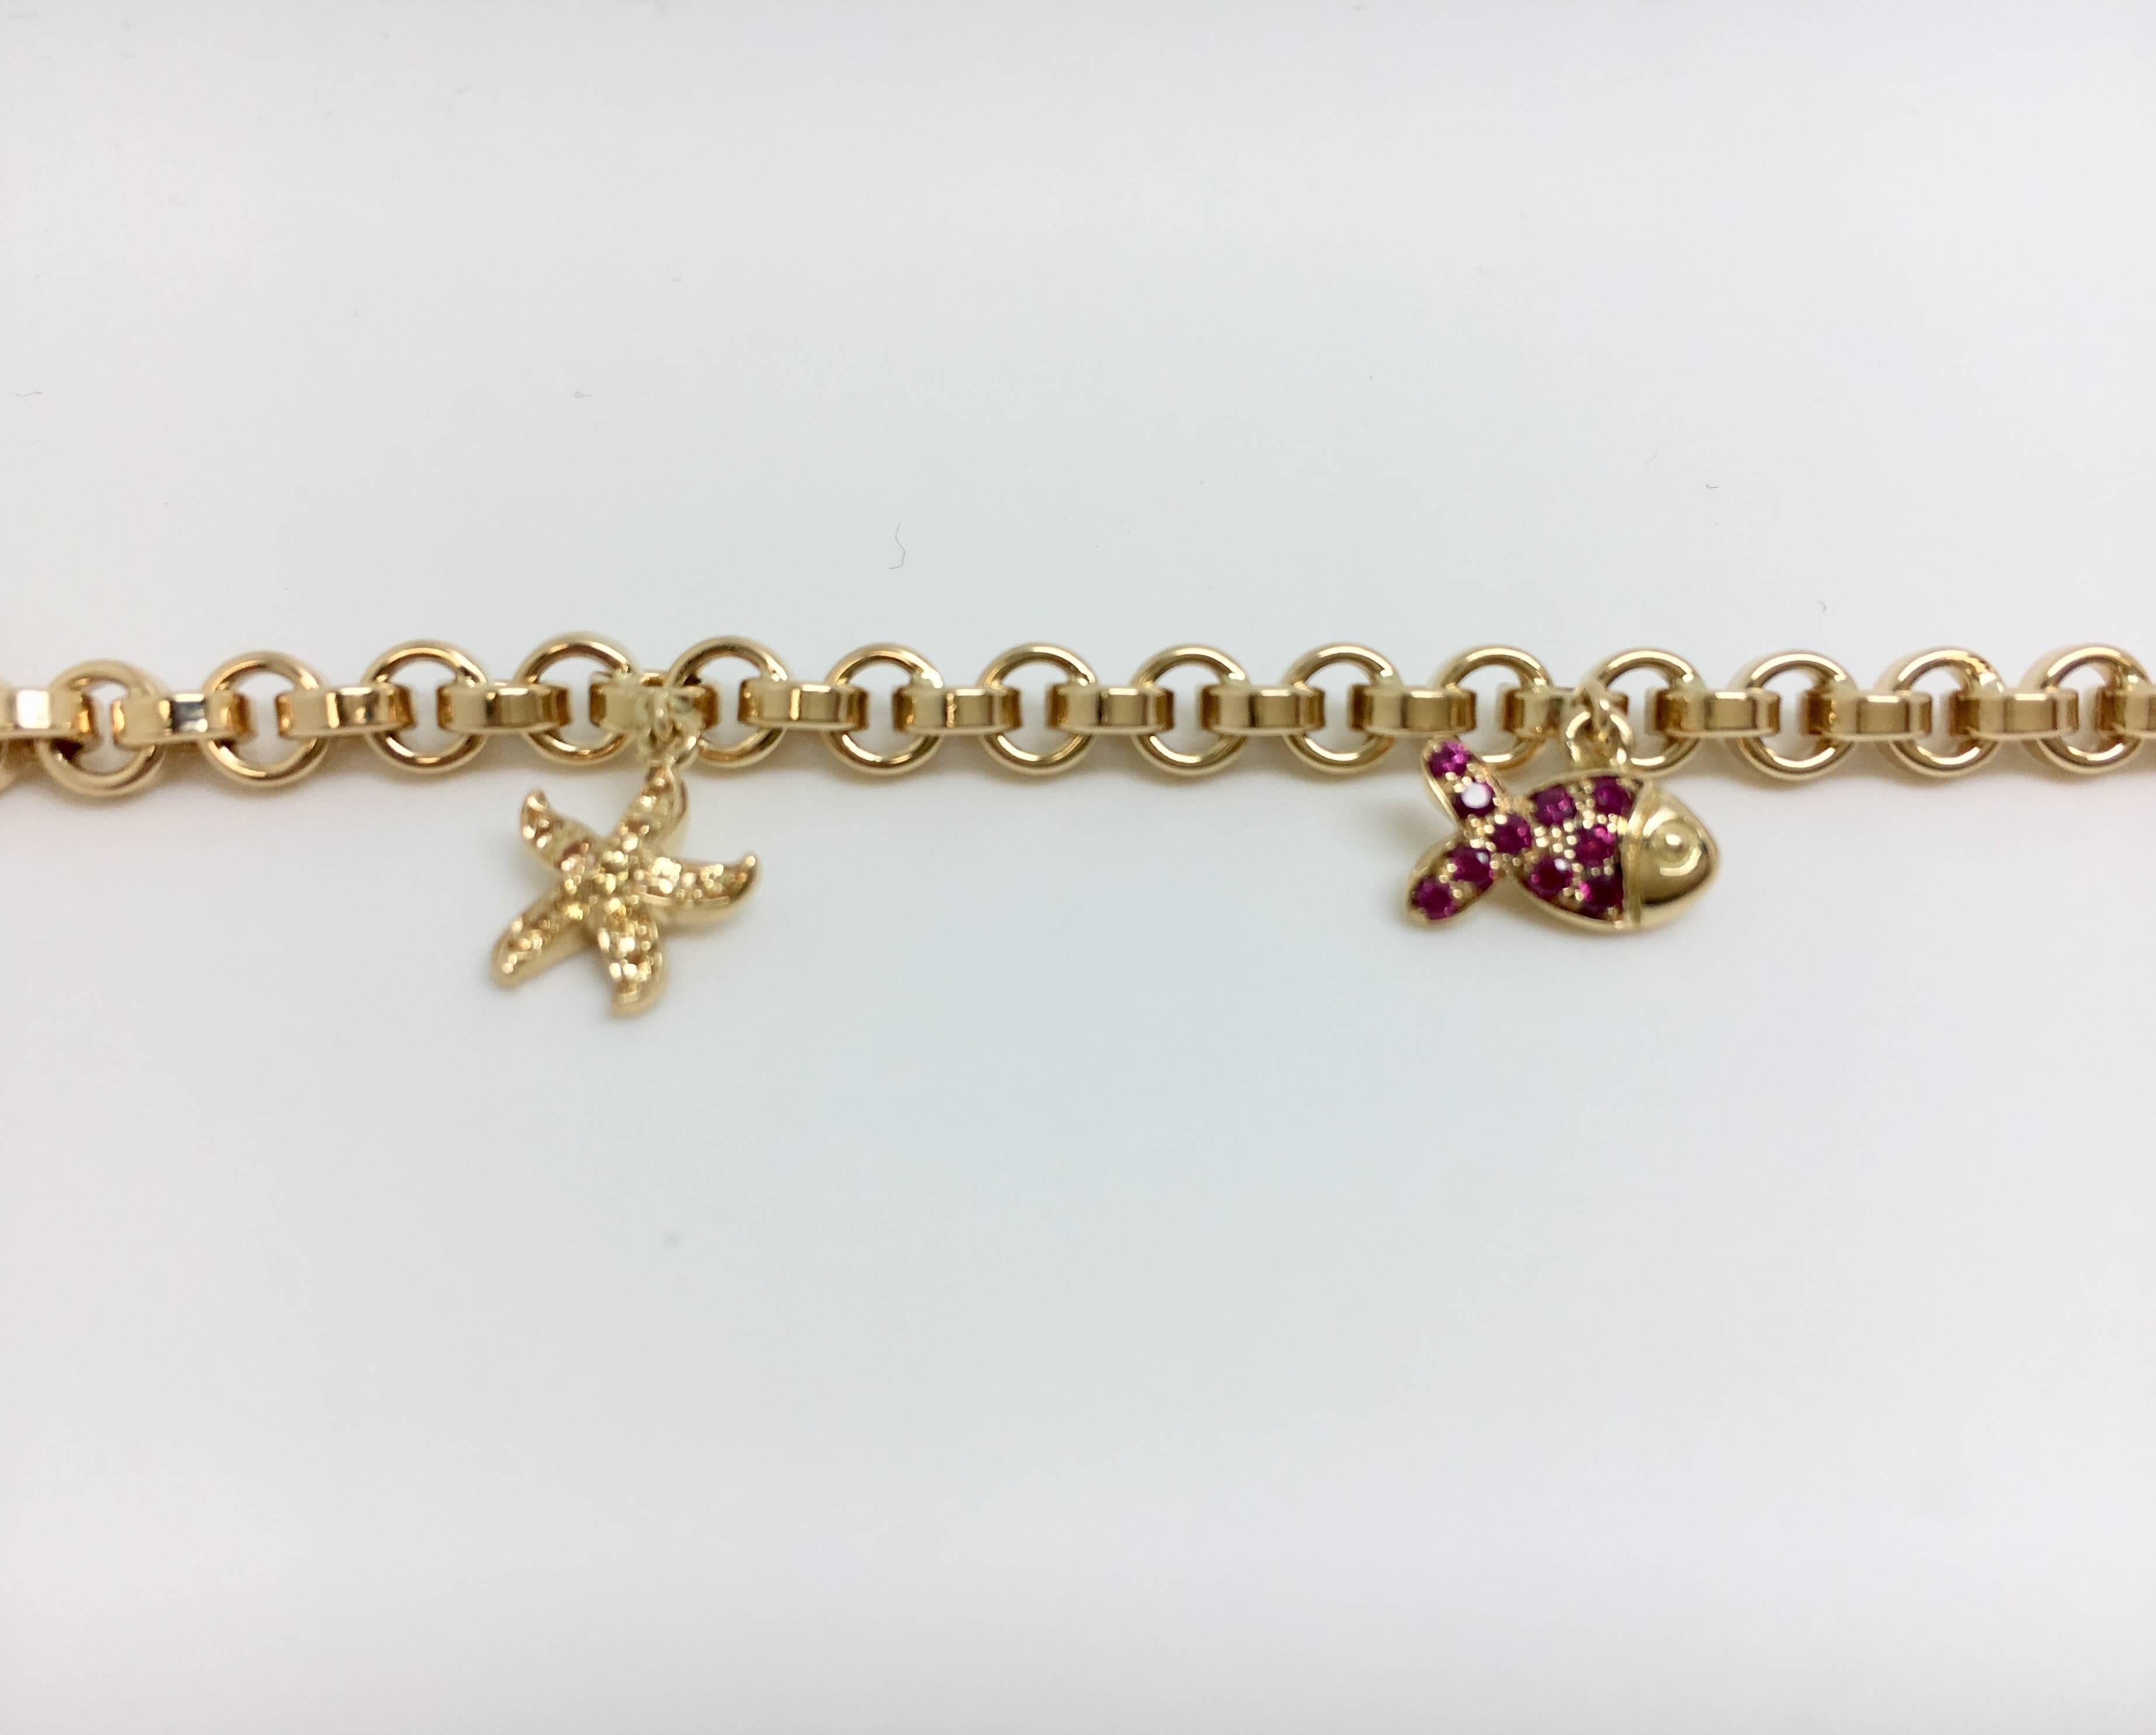 Chopard 18 Karat Yellow Gold Link Bracelet In Excellent Condition For Sale In Ottawa, Ontario